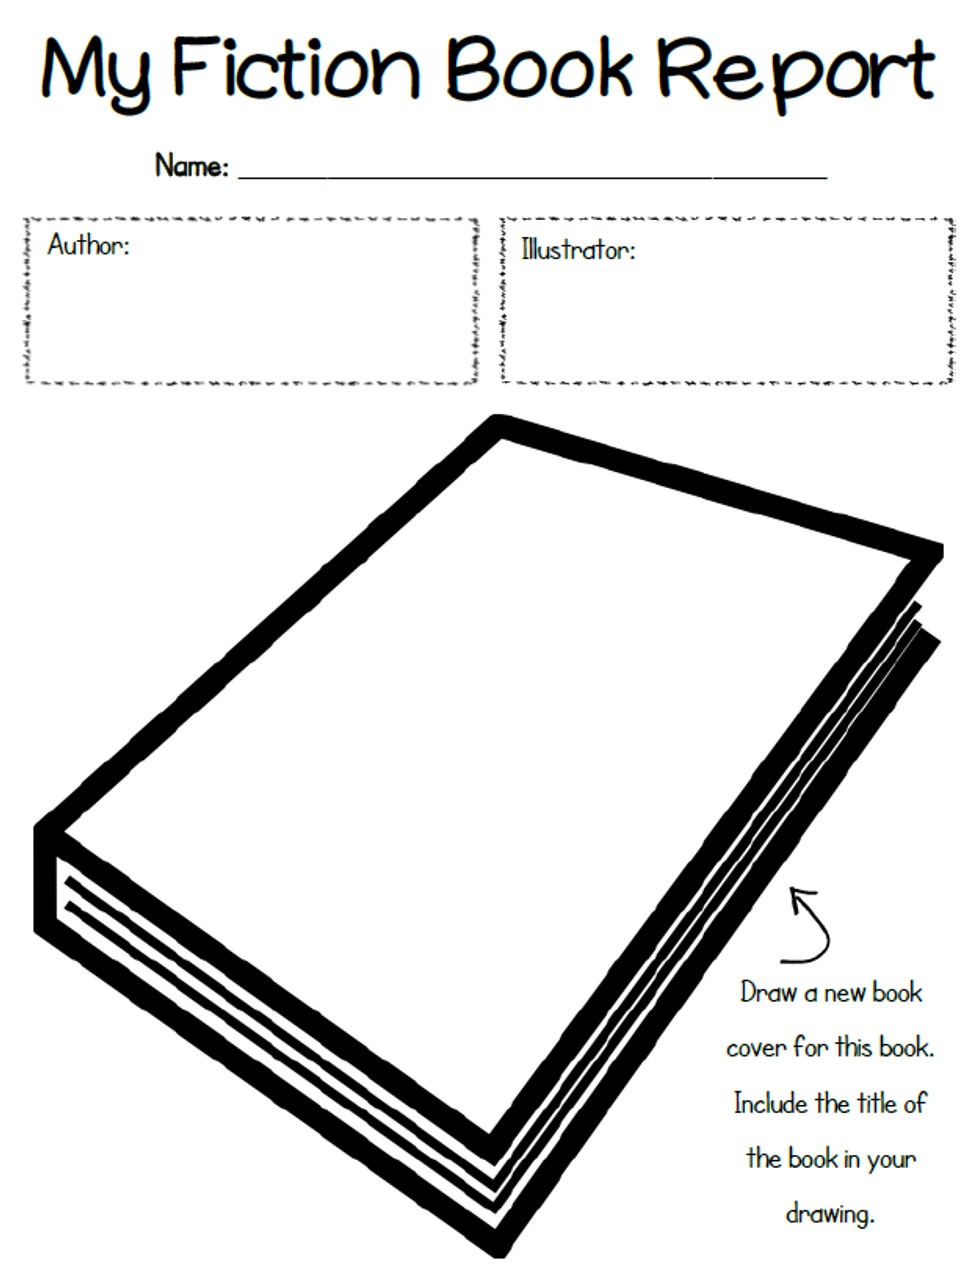 Fiction Book Report Packet